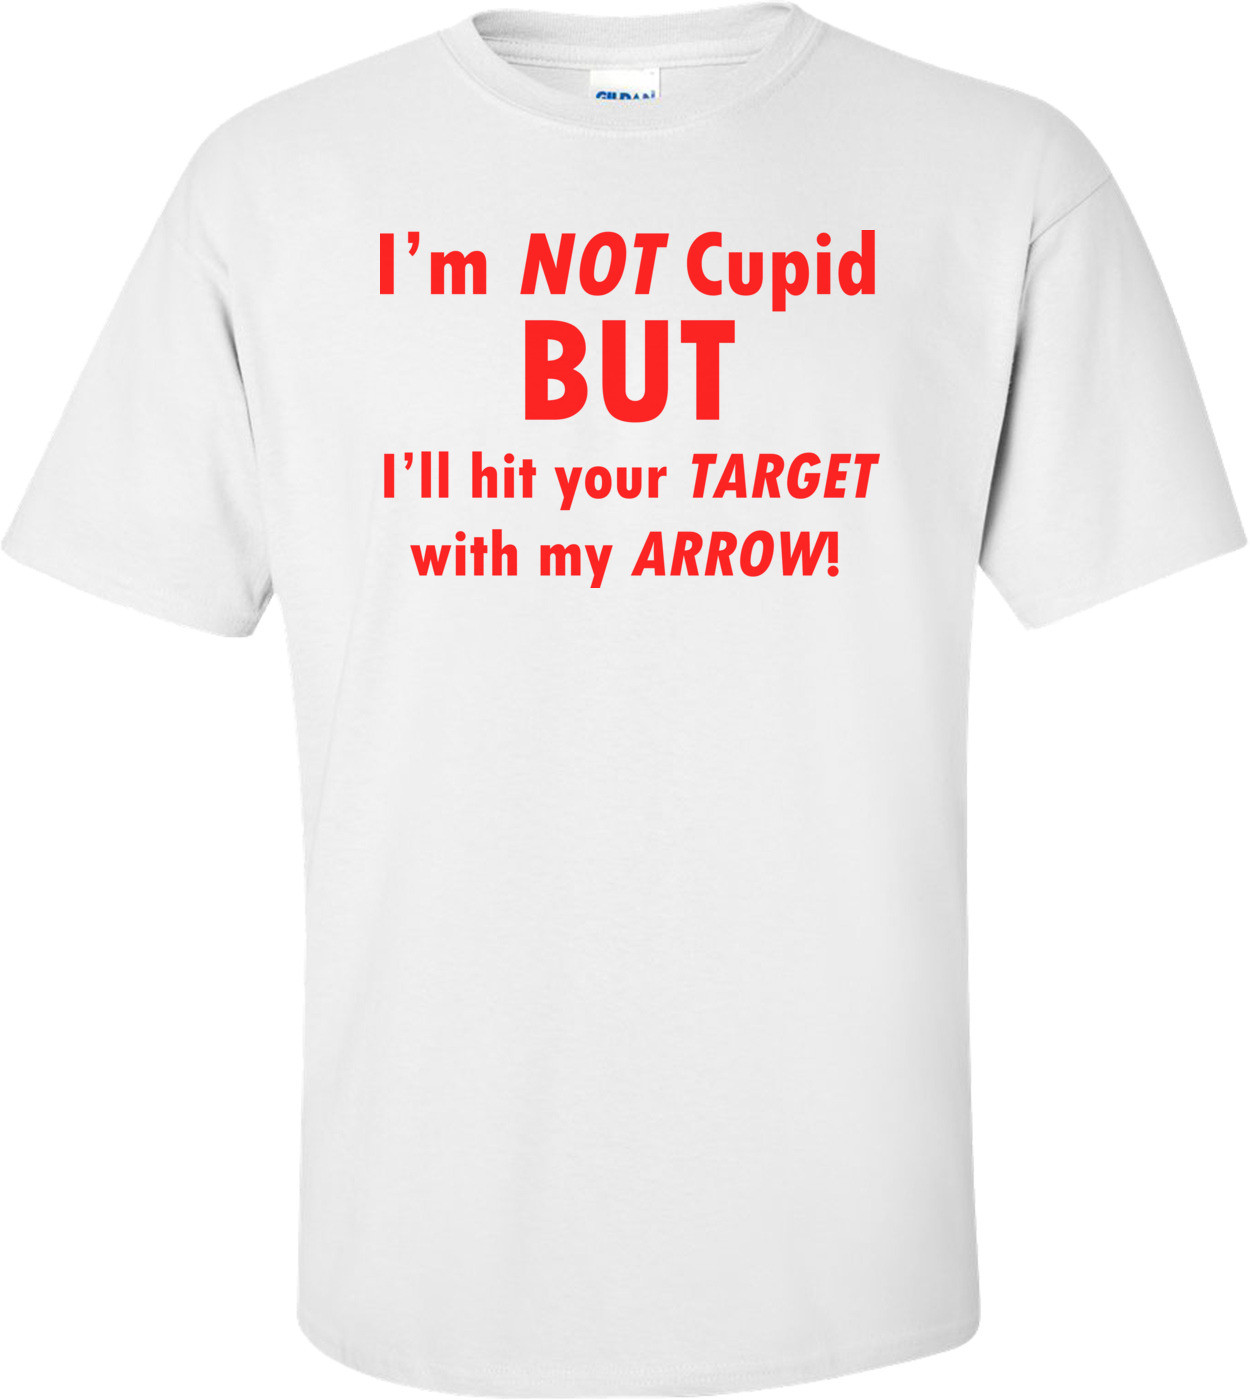 I'm Not Cupid But I'll Hit Your Target With My Arrow!  Funny Valentine's Day Shirt